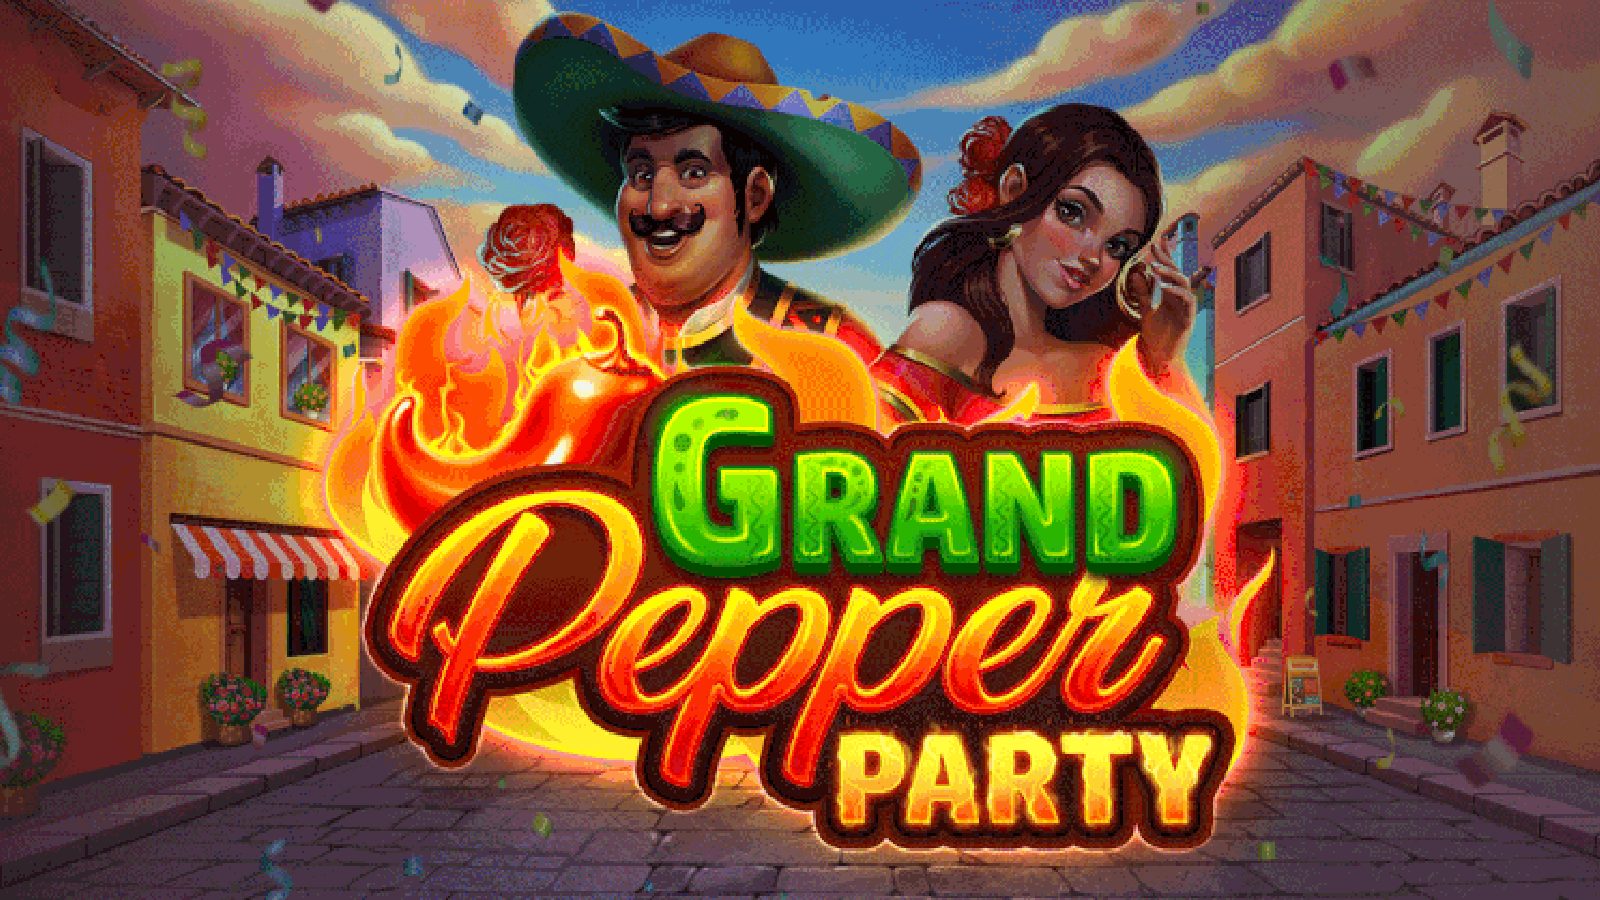 Grand Pepper Party by Wizard Games